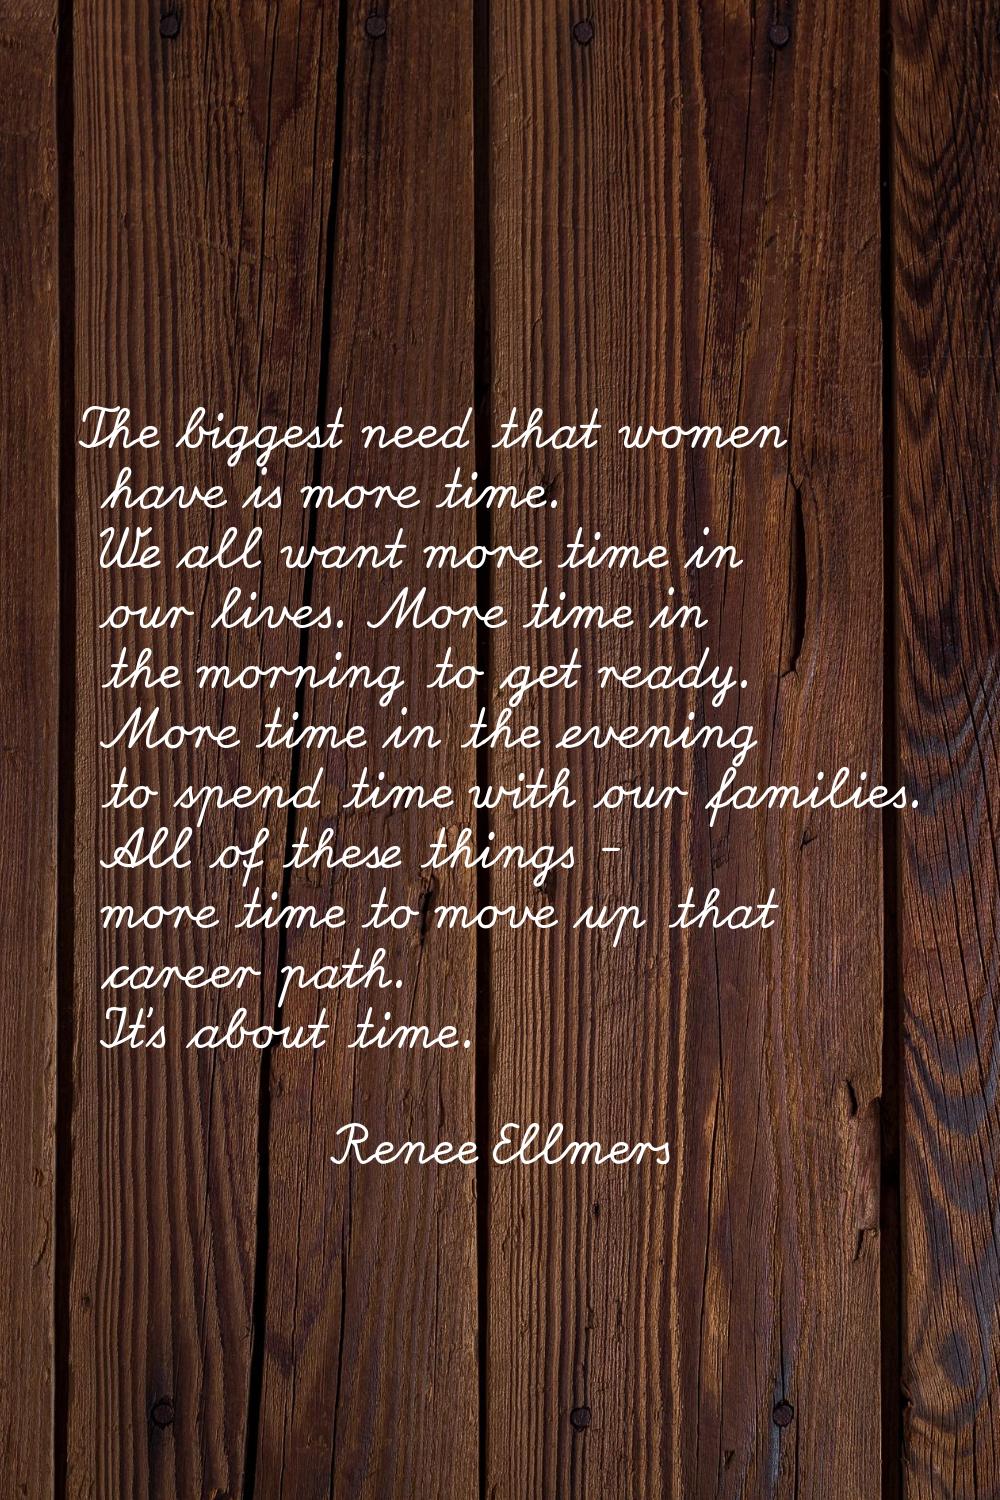 The biggest need that women have is more time. We all want more time in our lives. More time in the